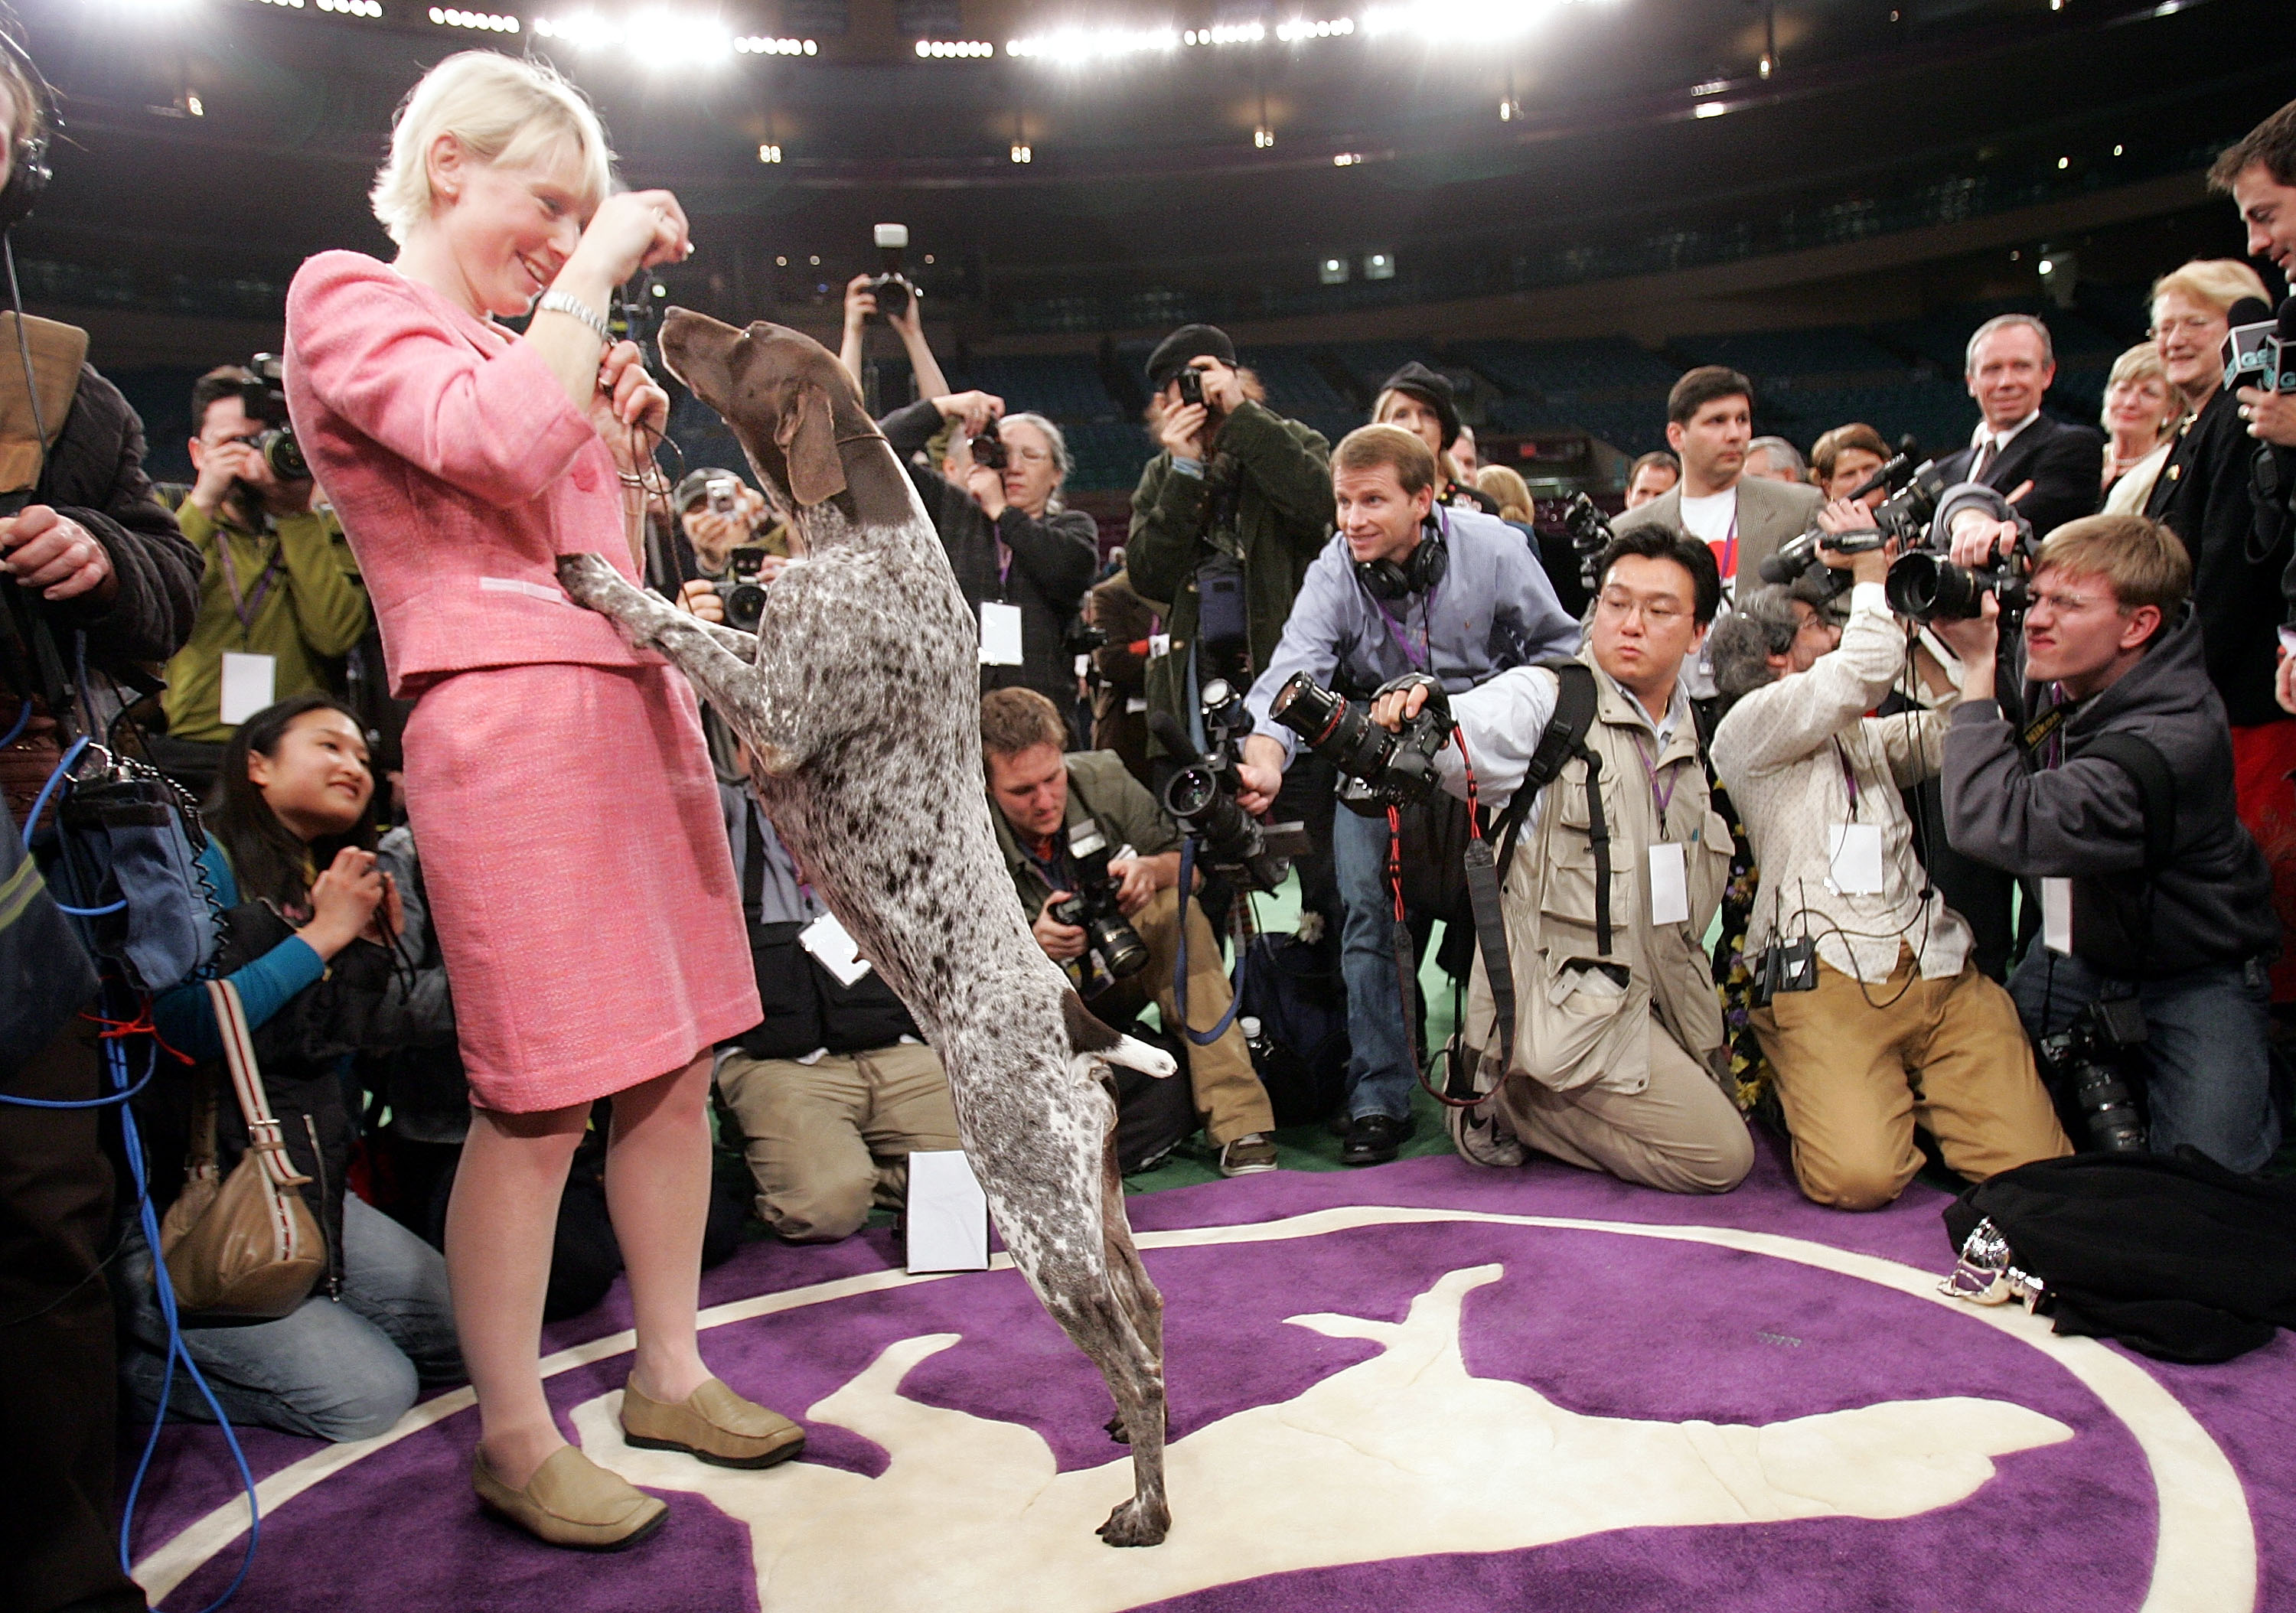 NEW YORK - FEBRUARY 15: Carlee, a German Shorthaired Pointer, celebrates with handler Michelle Ostermiller after winning the Westminster Kennel Club Dog Show's Best In Show award at Madison Square Garden February 15, 2005 in New York City. (Photo by Mario Tama/Getty Images) *** Local Caption *** Michelle Ostermiller ORG XMIT: 52196550 GTY ID: 52196550MT003_Westminster_D